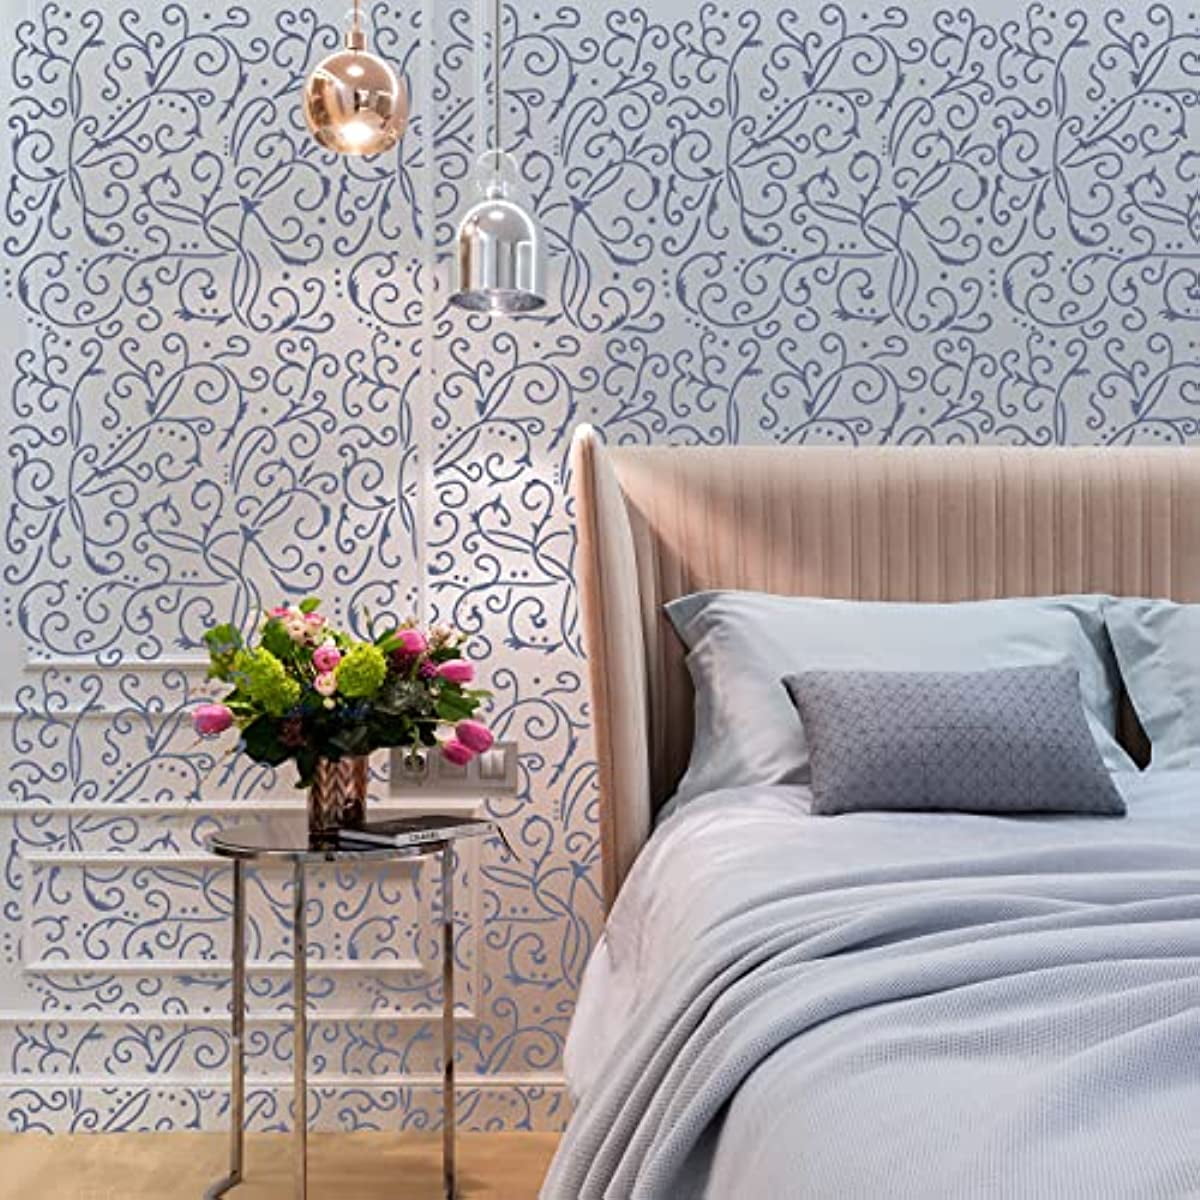 LOIRE - Large Floral Wall Stencil Pattern / Large Wall Stencils for  Painting / Stencils For Walls / Leaf Stencils / Large WALL STENCIL